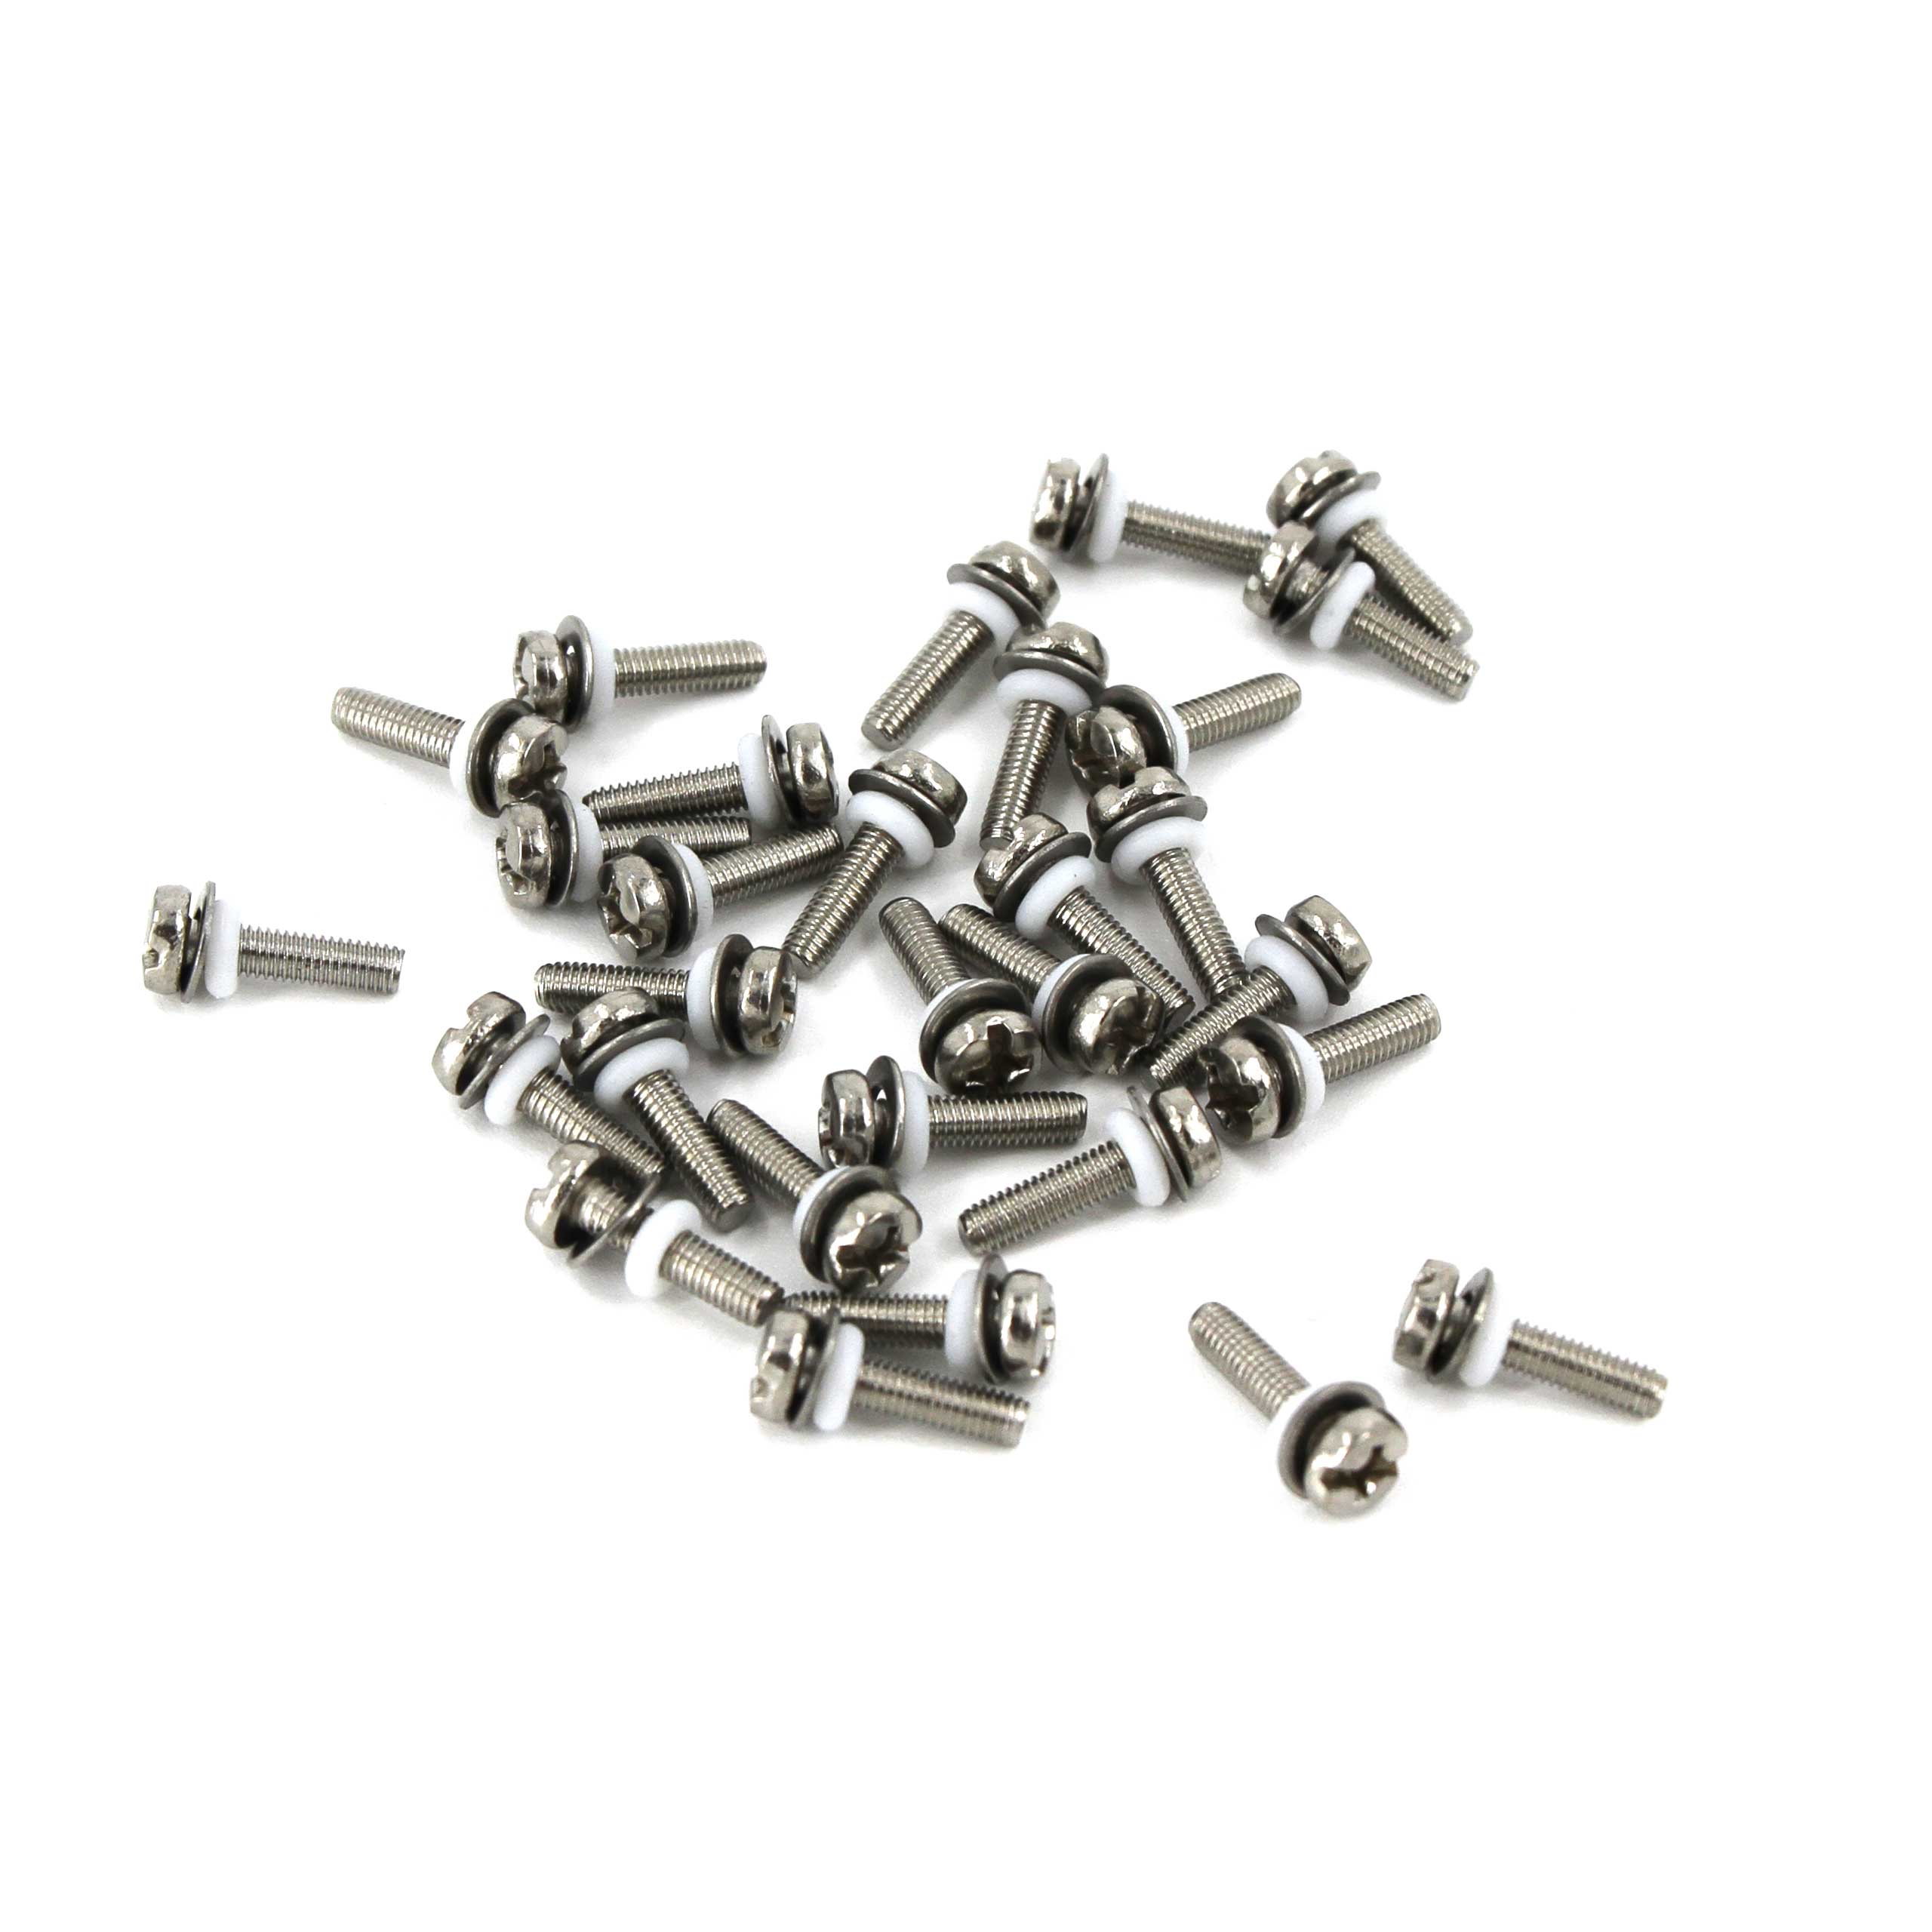 BearCreeks Bait Boat Screw Set for Bottom and Top Hull